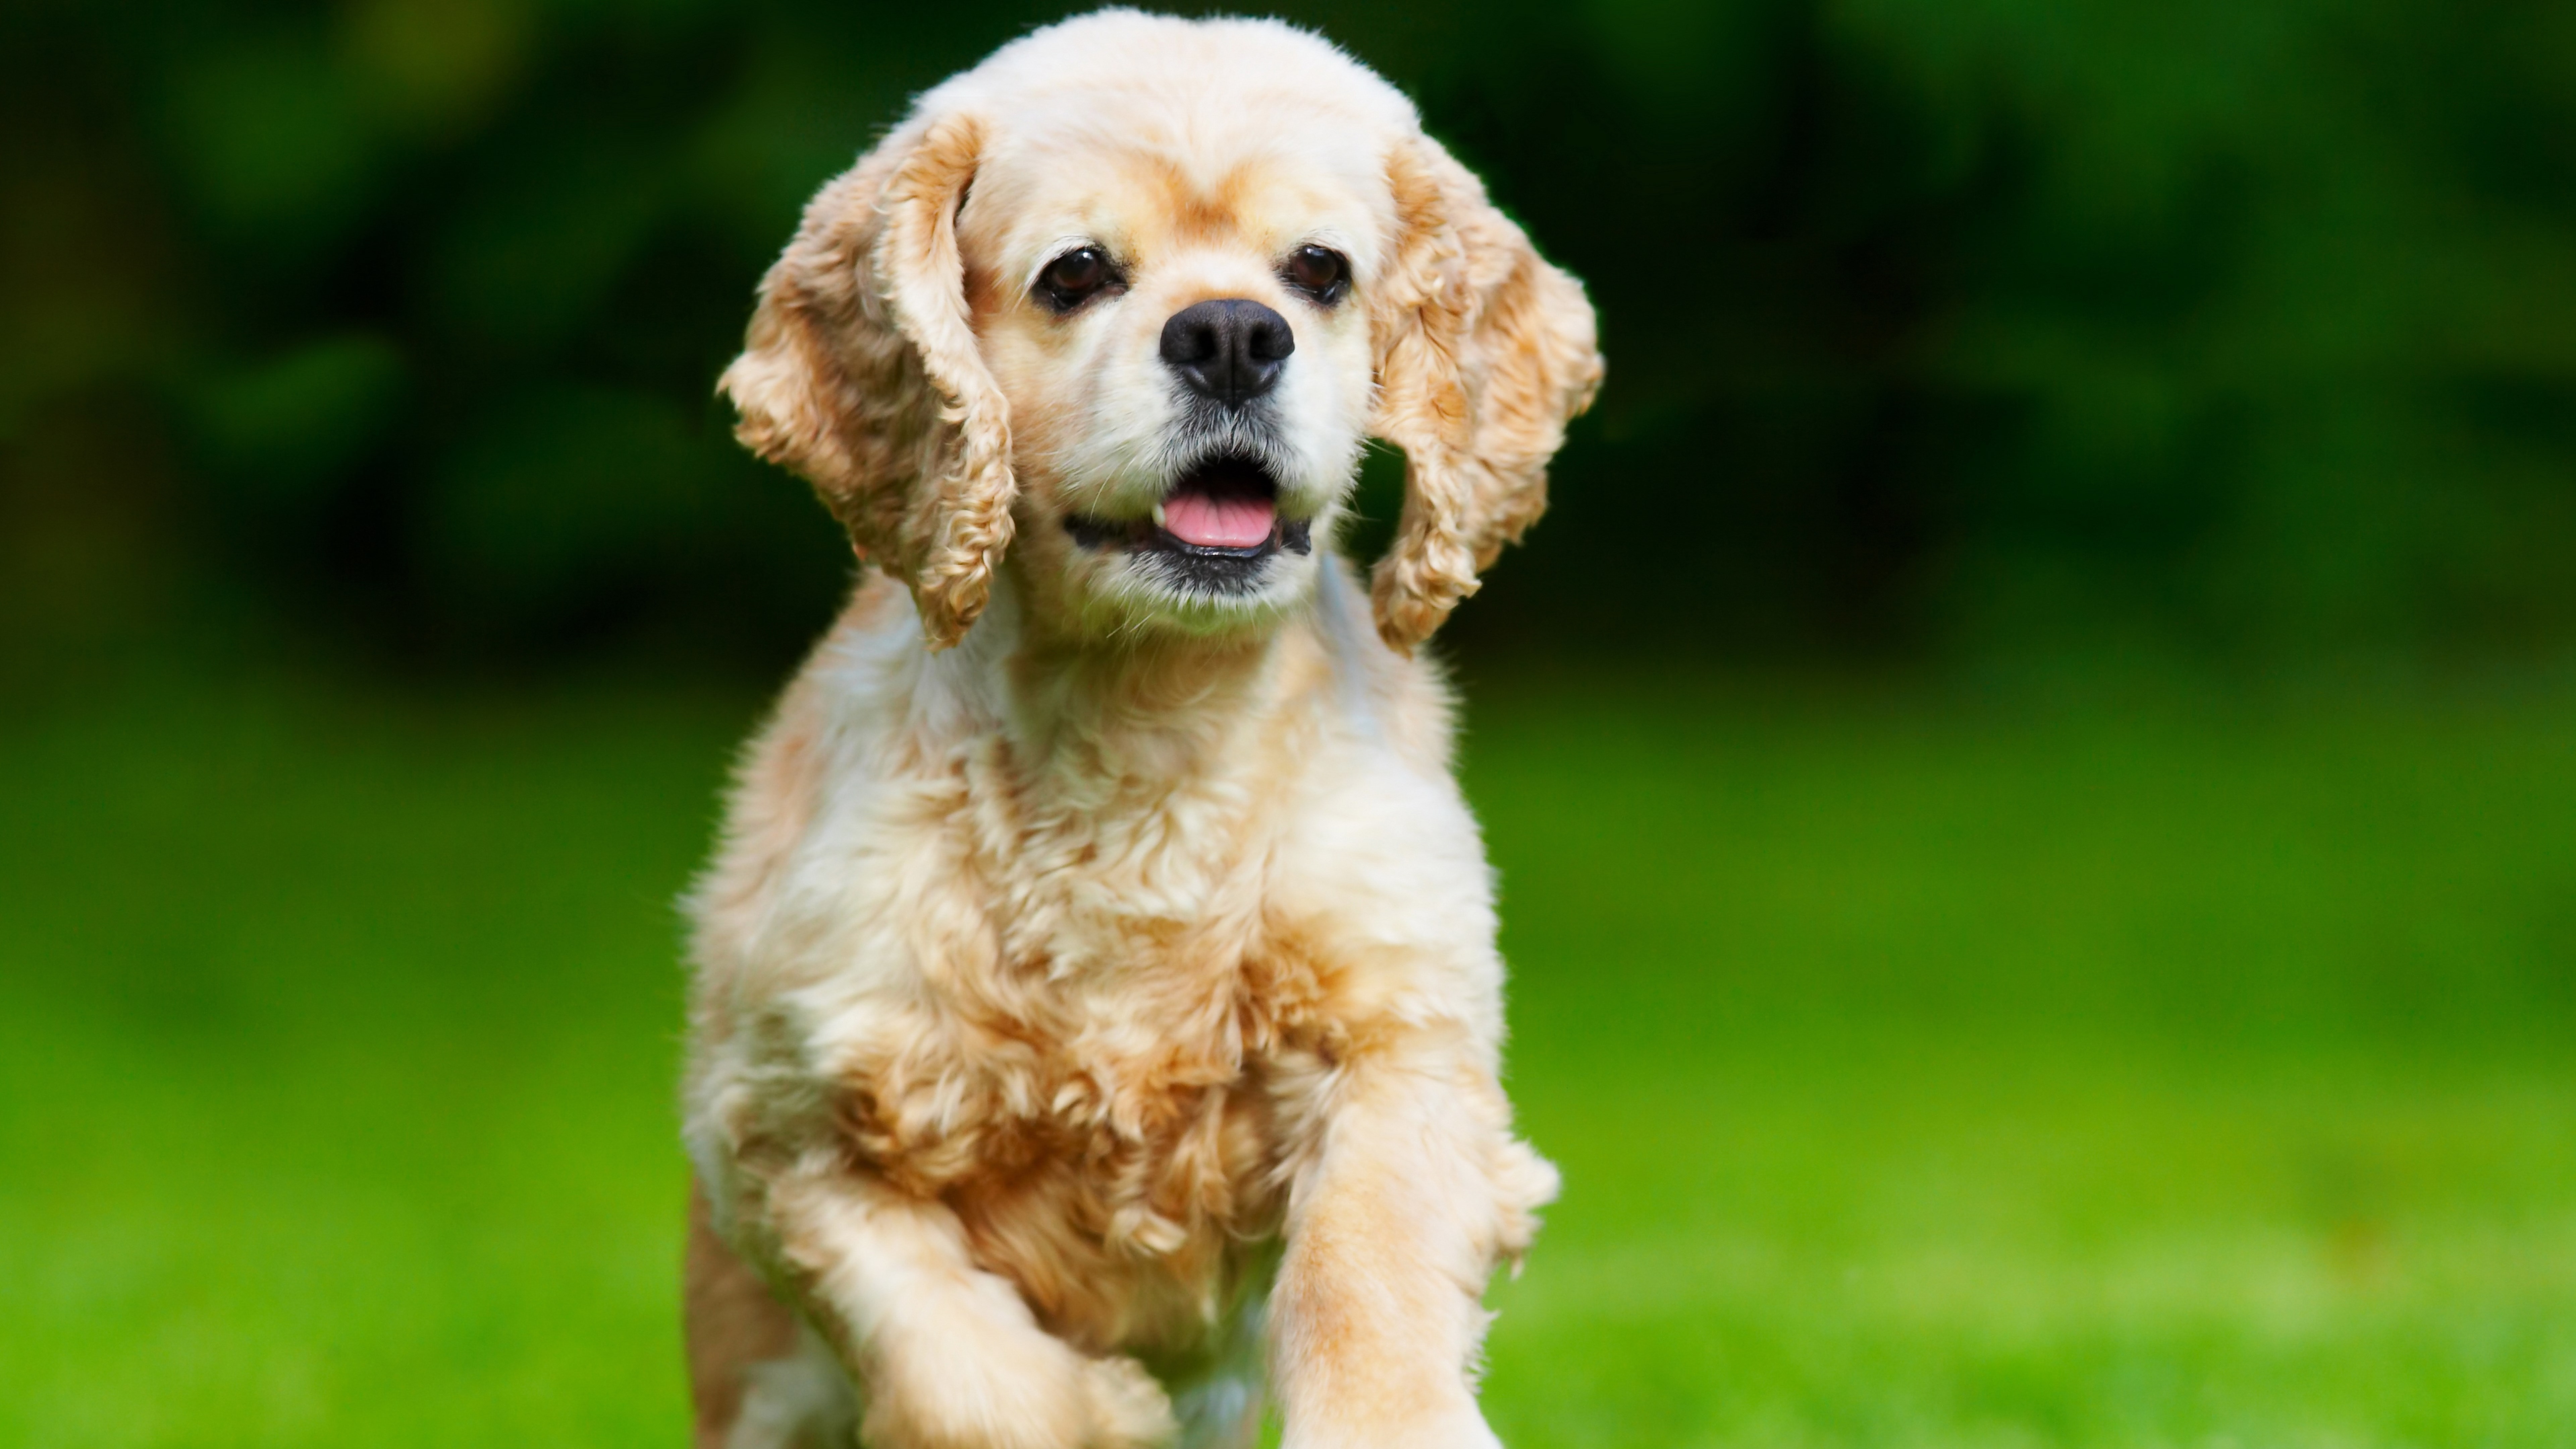 a cute puppy cocker spaniel dog picture, canine, one animal